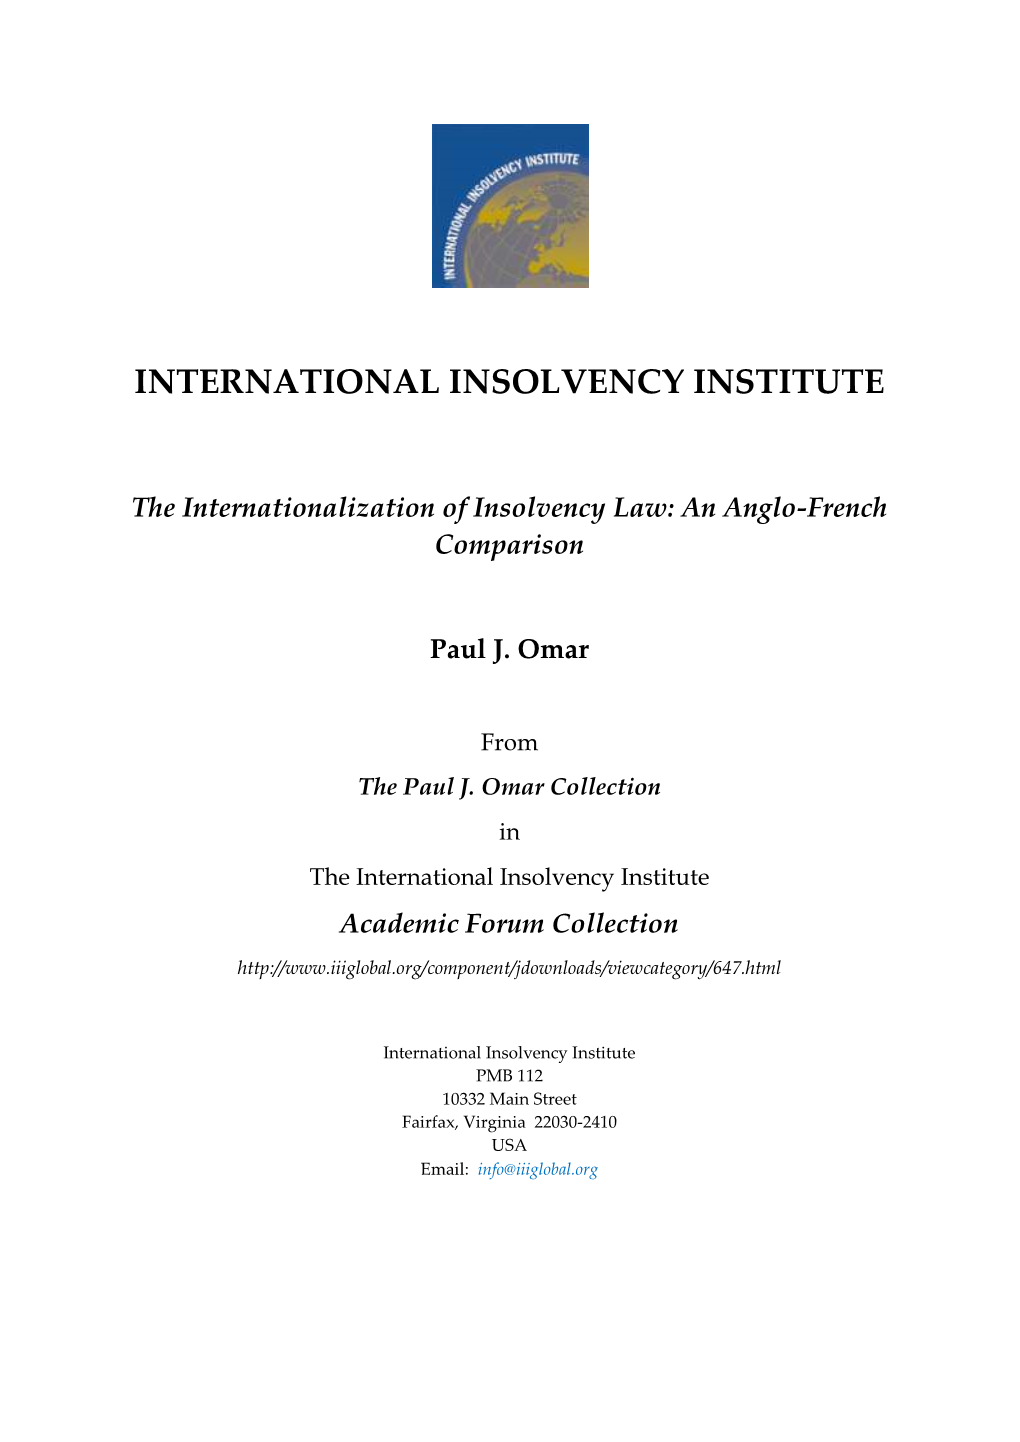 The Internationalisation of Insolvency Law: an Anglo-French Comparison